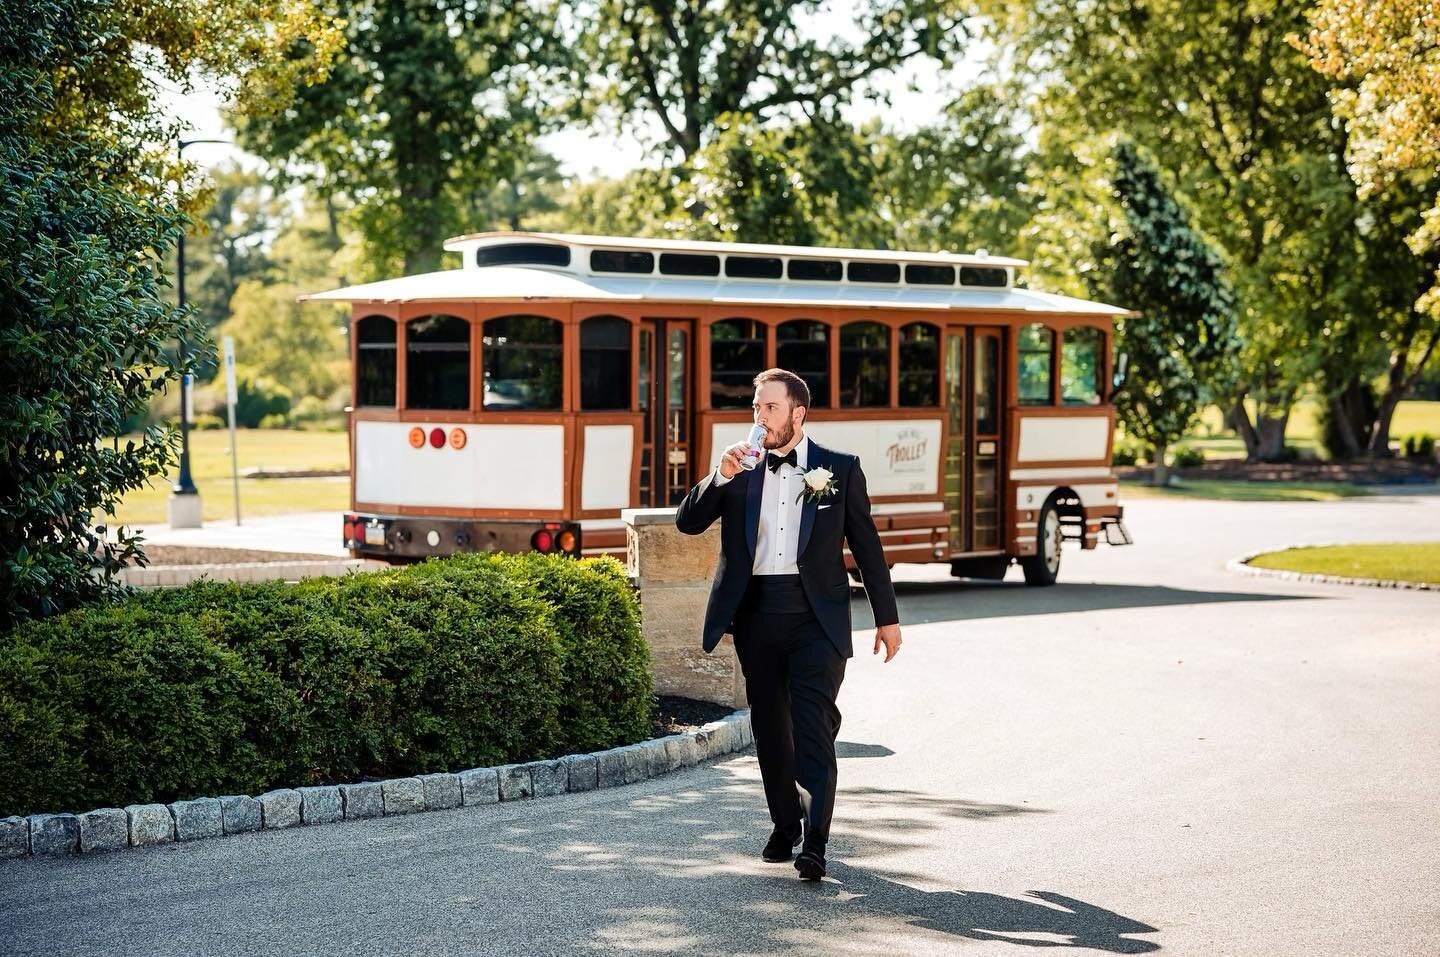 Walking away from the new FAQ page on our website with all questions answered about wedding transportation 😎🚃

Click the link in bio to check it out! 
. 
. 
#pabride #buckscounty #montcopa #paweddingideas #paweddings #pawedding #paweddingplanner #p